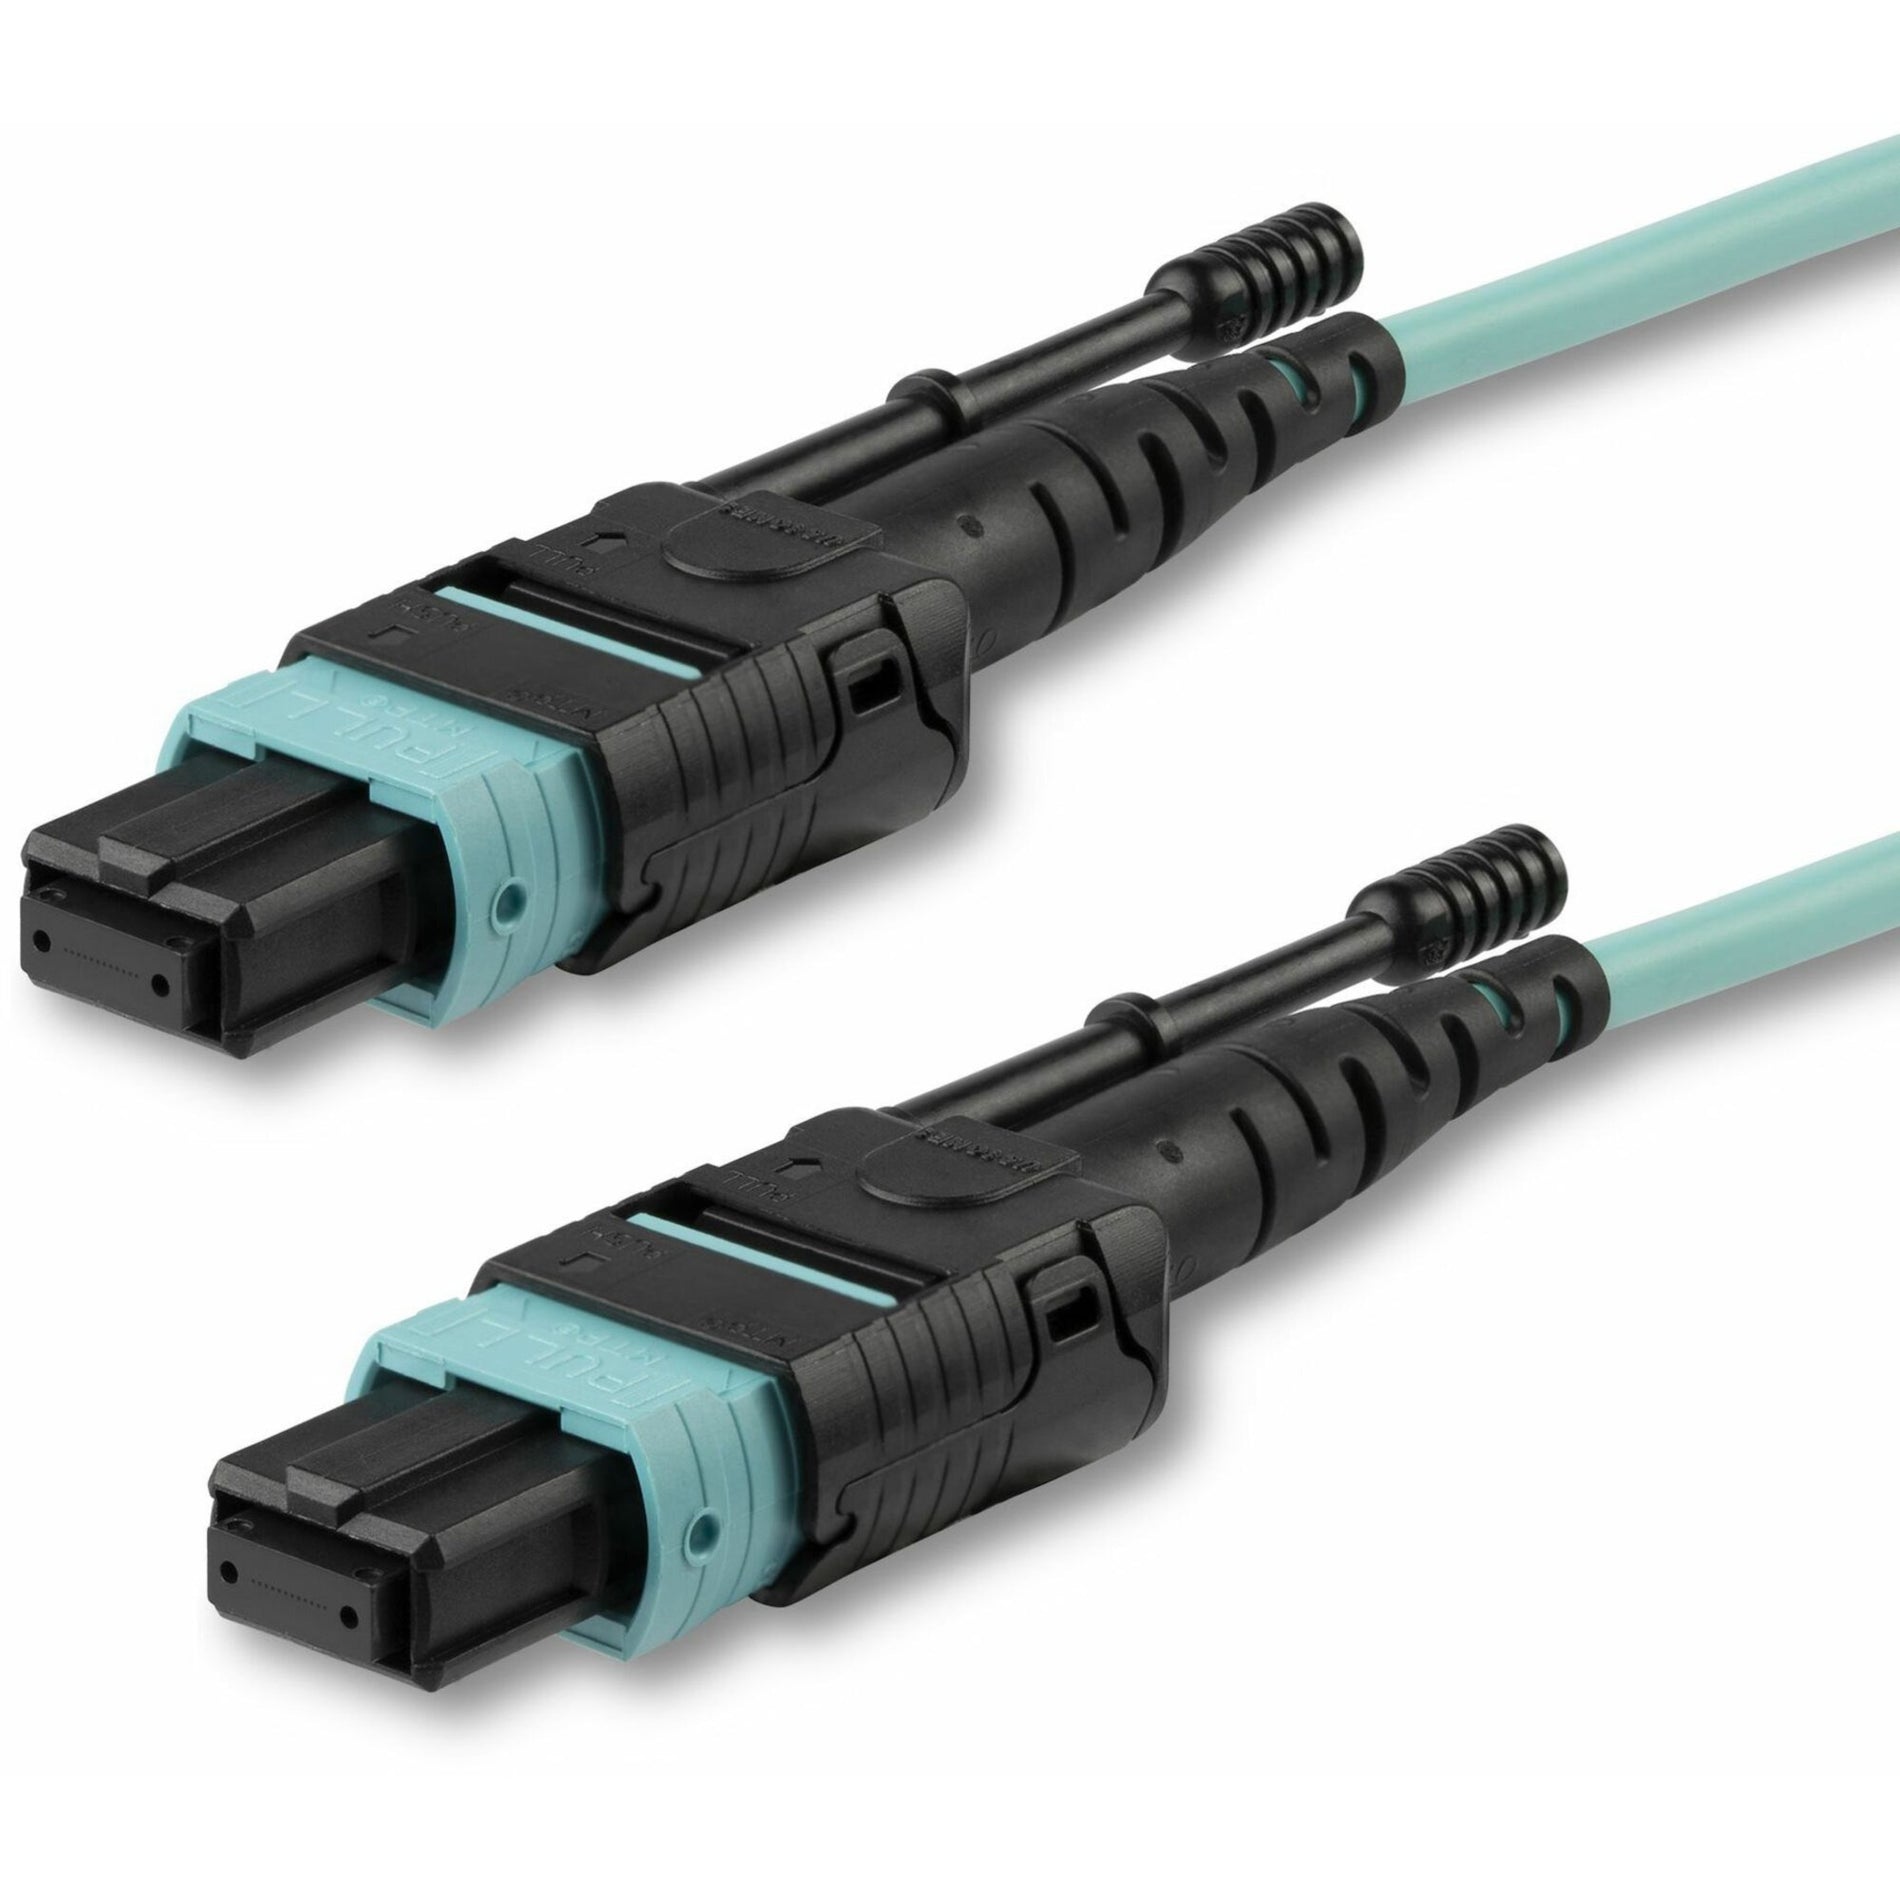 StarTech.com MPO12PL10M Fiber Optic Network Cable, 10m 30 ft Plenum-Rated MTP to MTP Cable, OM3, 40G MPO Cable